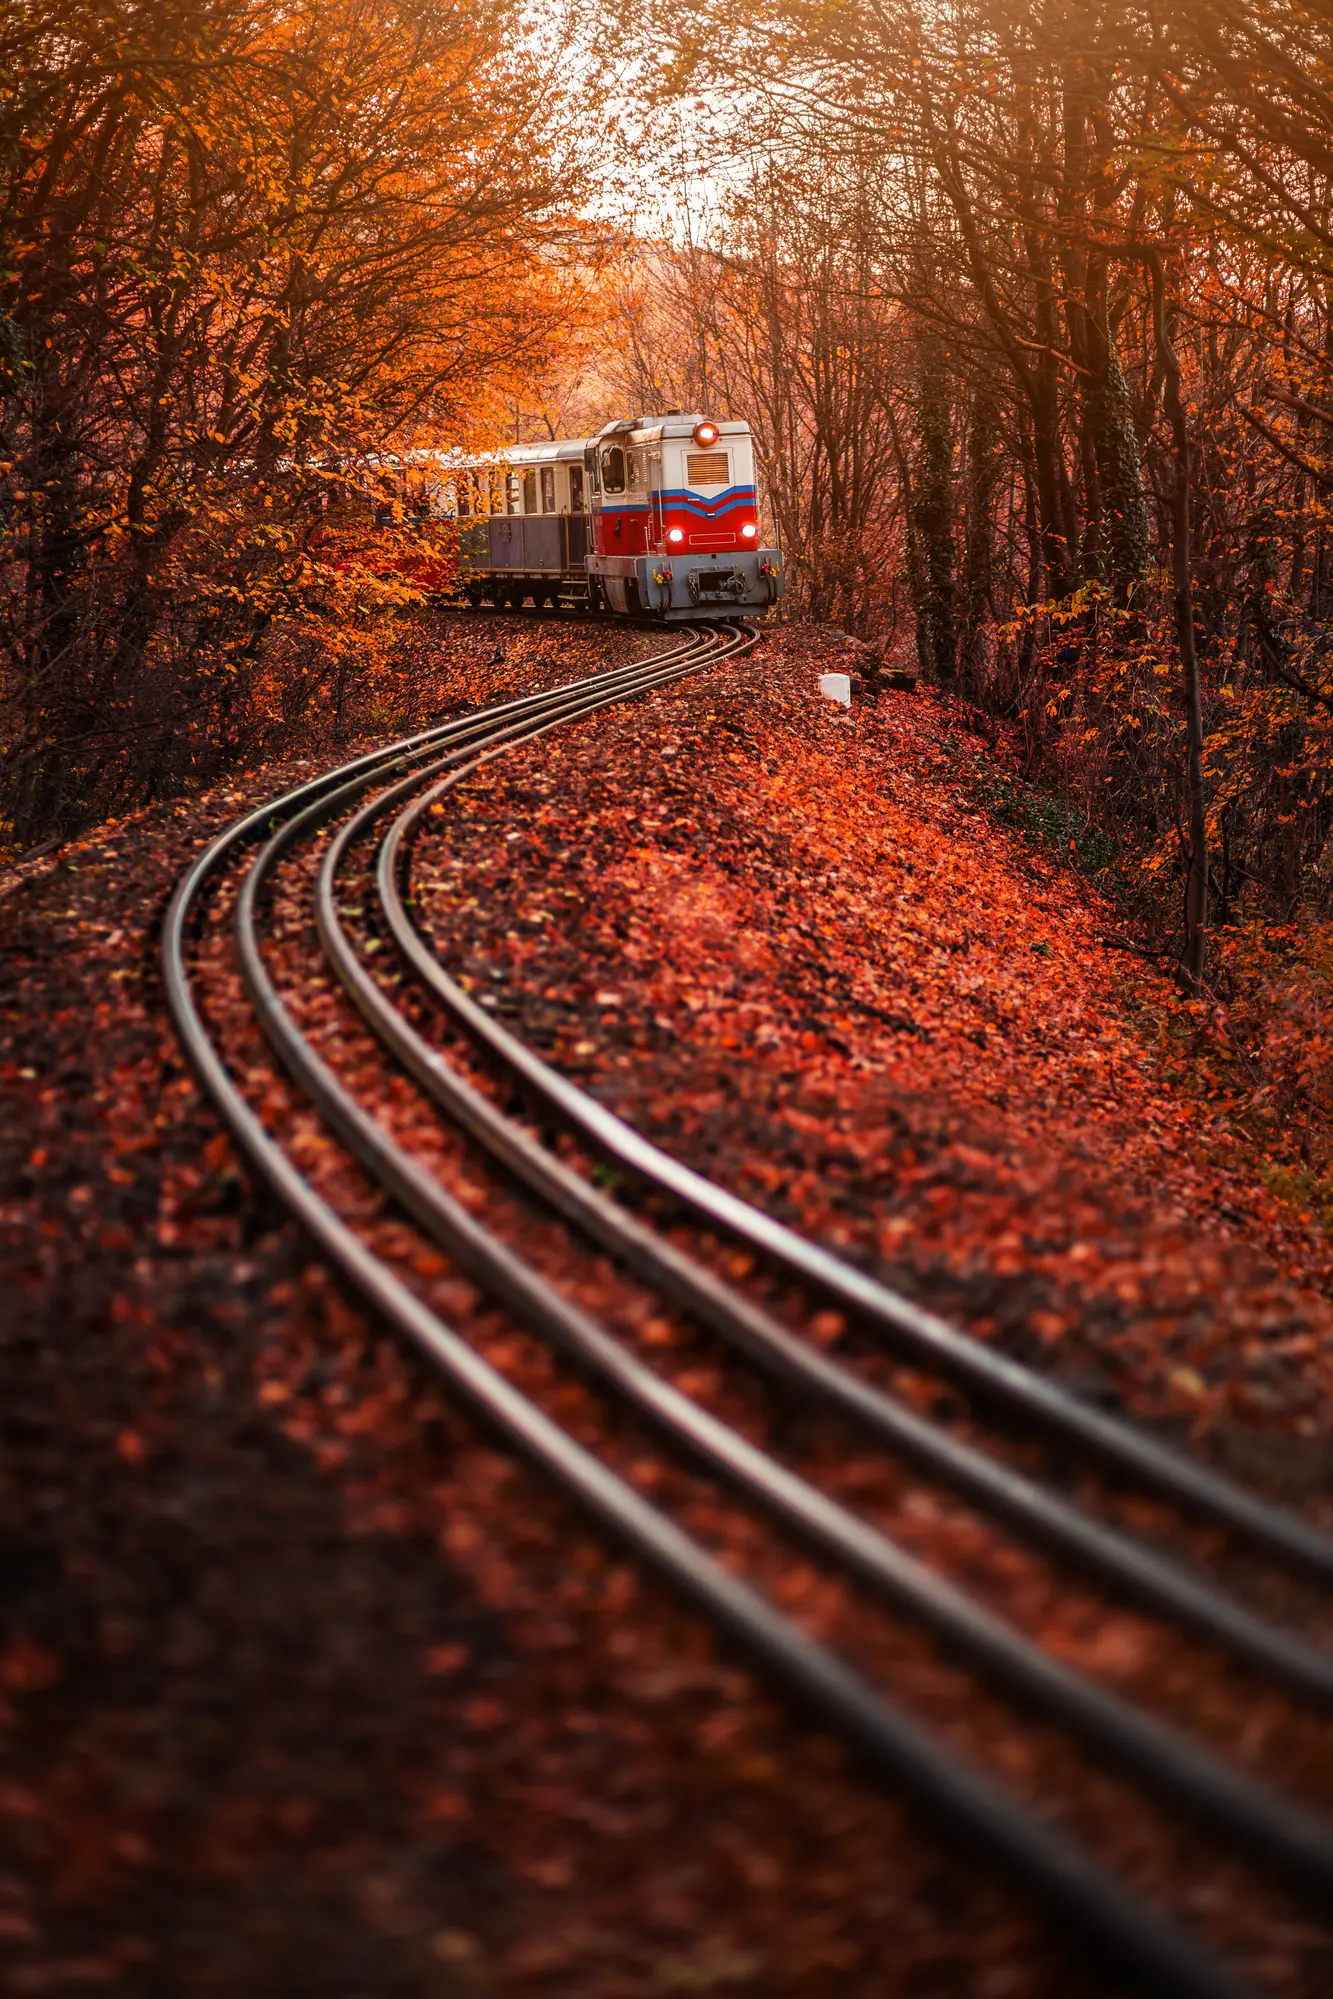 Red, blue and white Children's Railway train driving towards the camera through an orange forest in fall, a hidden gem in Budapest.